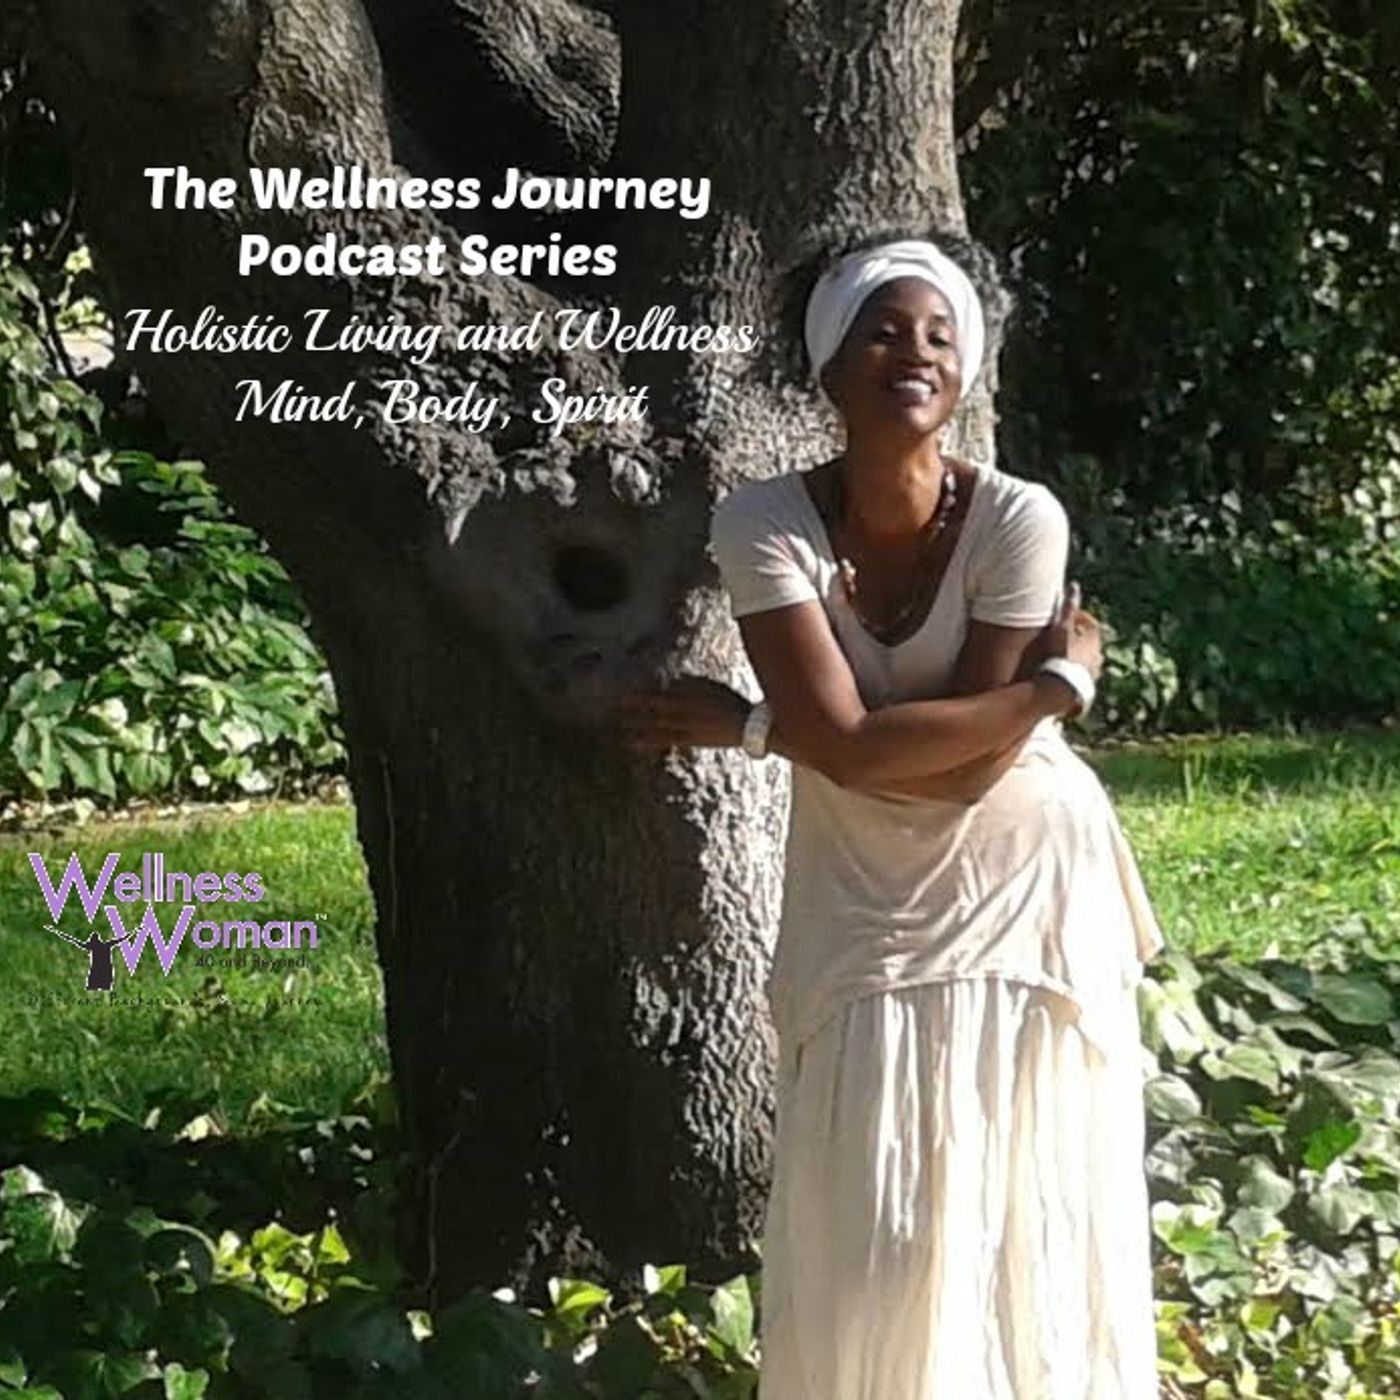 The Wellness Journey Podcast Series